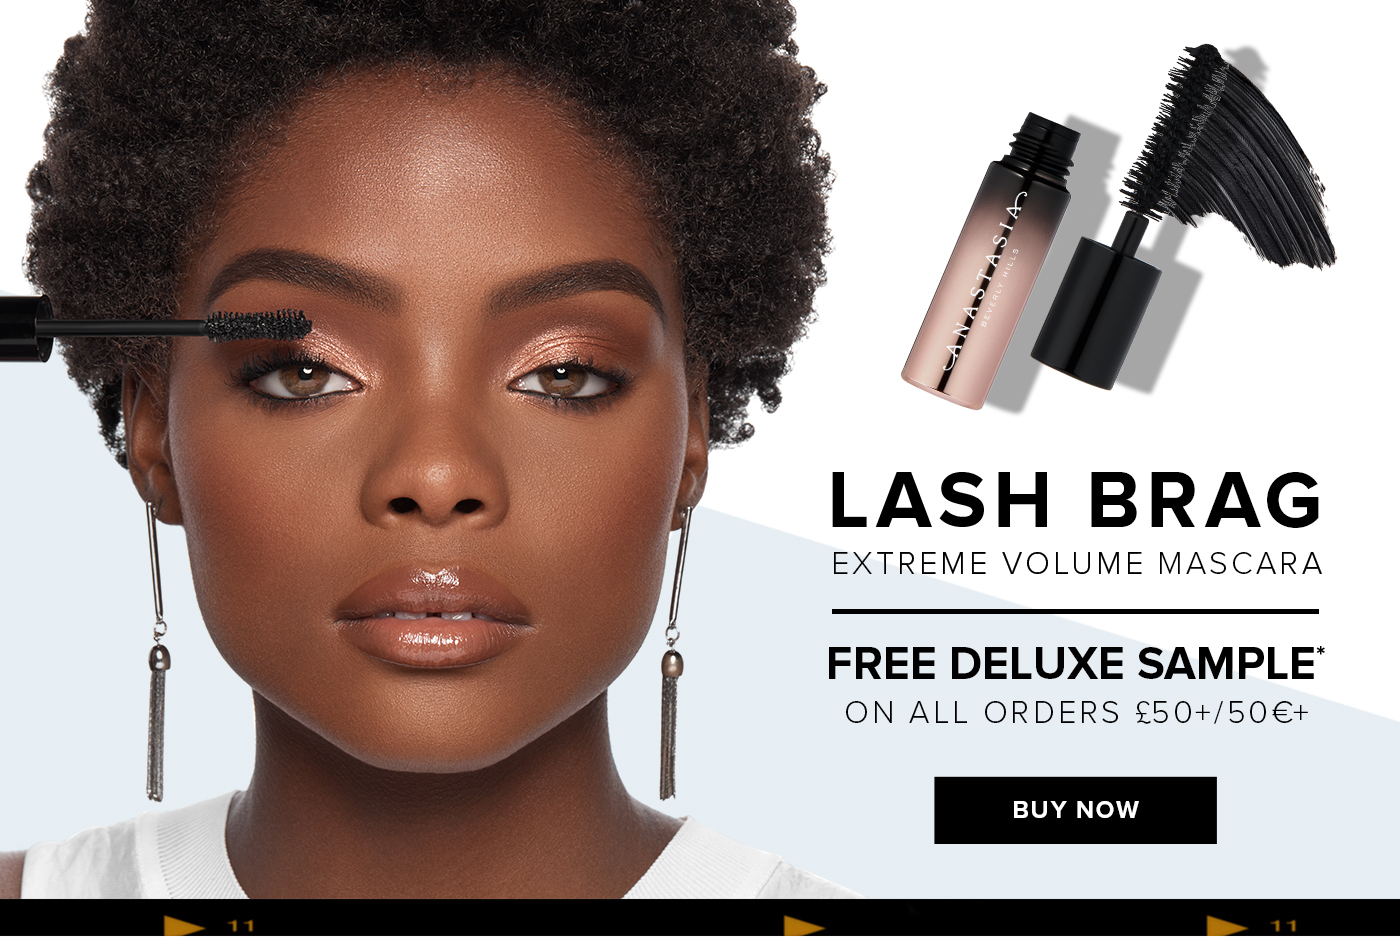 LASH BRAG EXTREME VOLUME MASCARA. FREE DELUXE SAMPLE* ON ALL ORDERS ON ALL ORDERS ?50+/50?+ BUY NOW